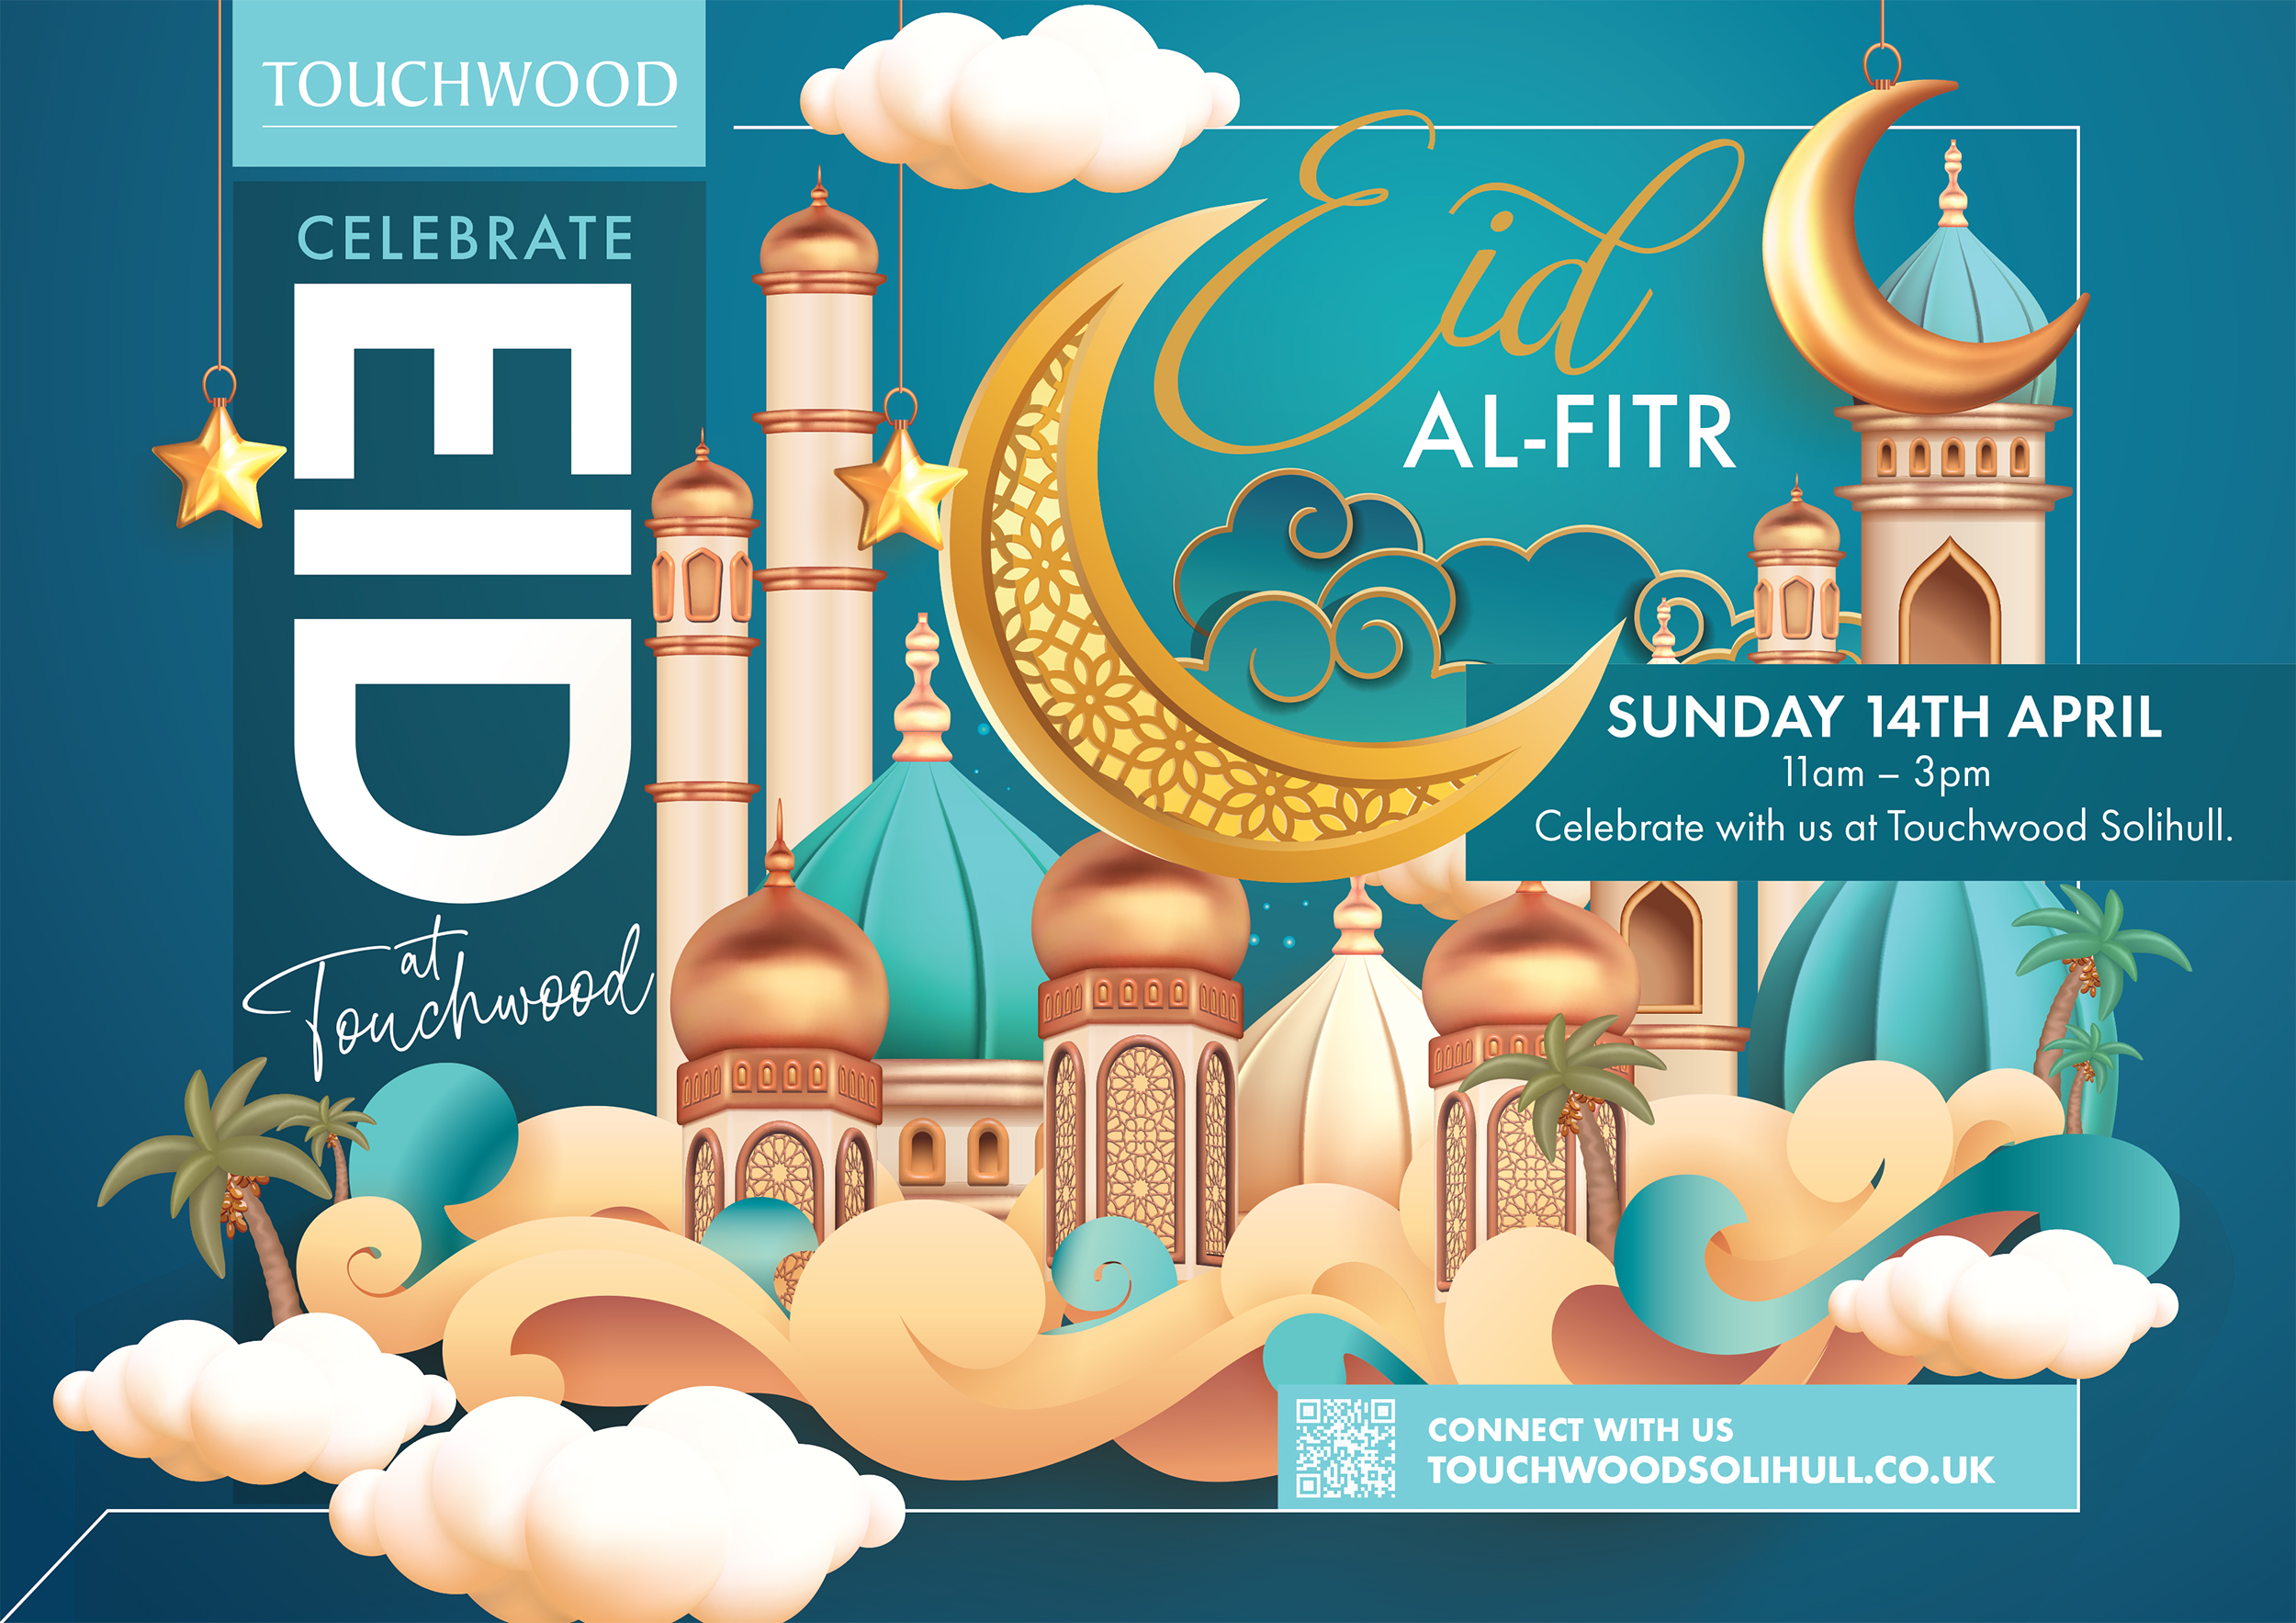 Touchwood to bring Solihull community together for Eid al Fitr celebration